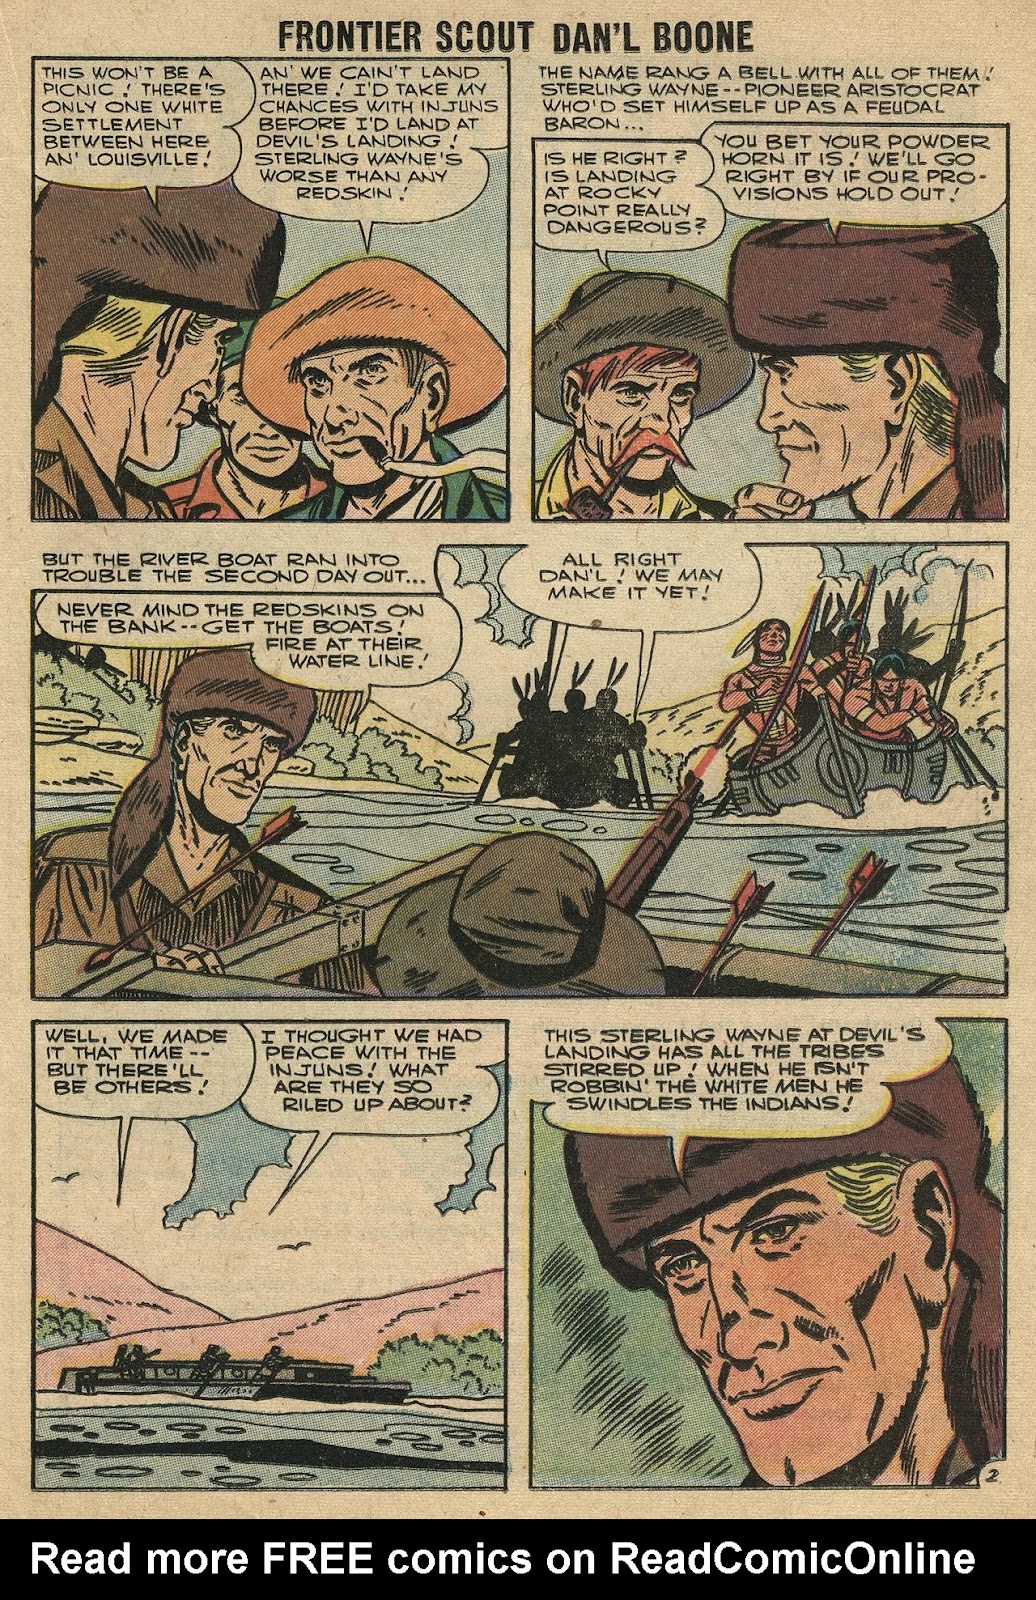 Frontier Scout, Dan'l Boone issue 13 - Page 21